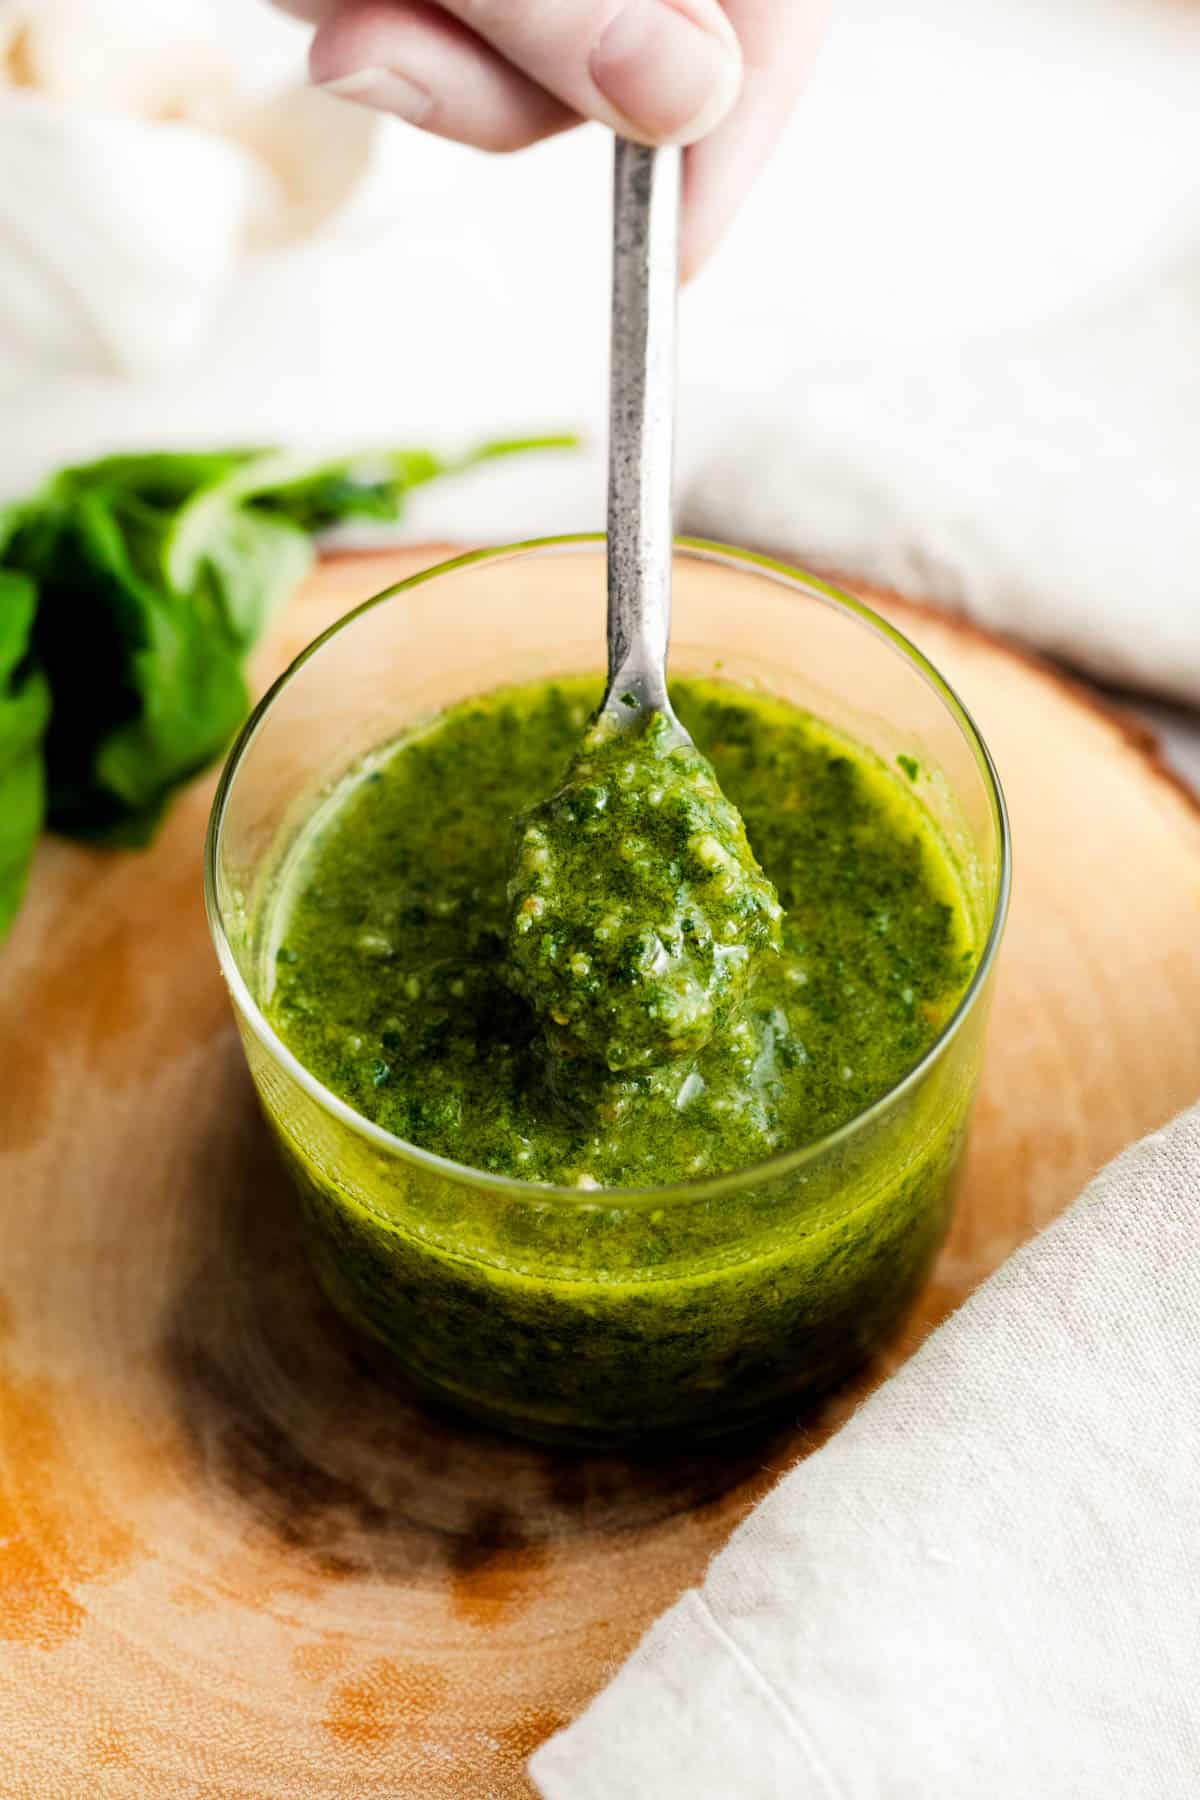 Homemade pesto sauce in a glass jar with a spoon